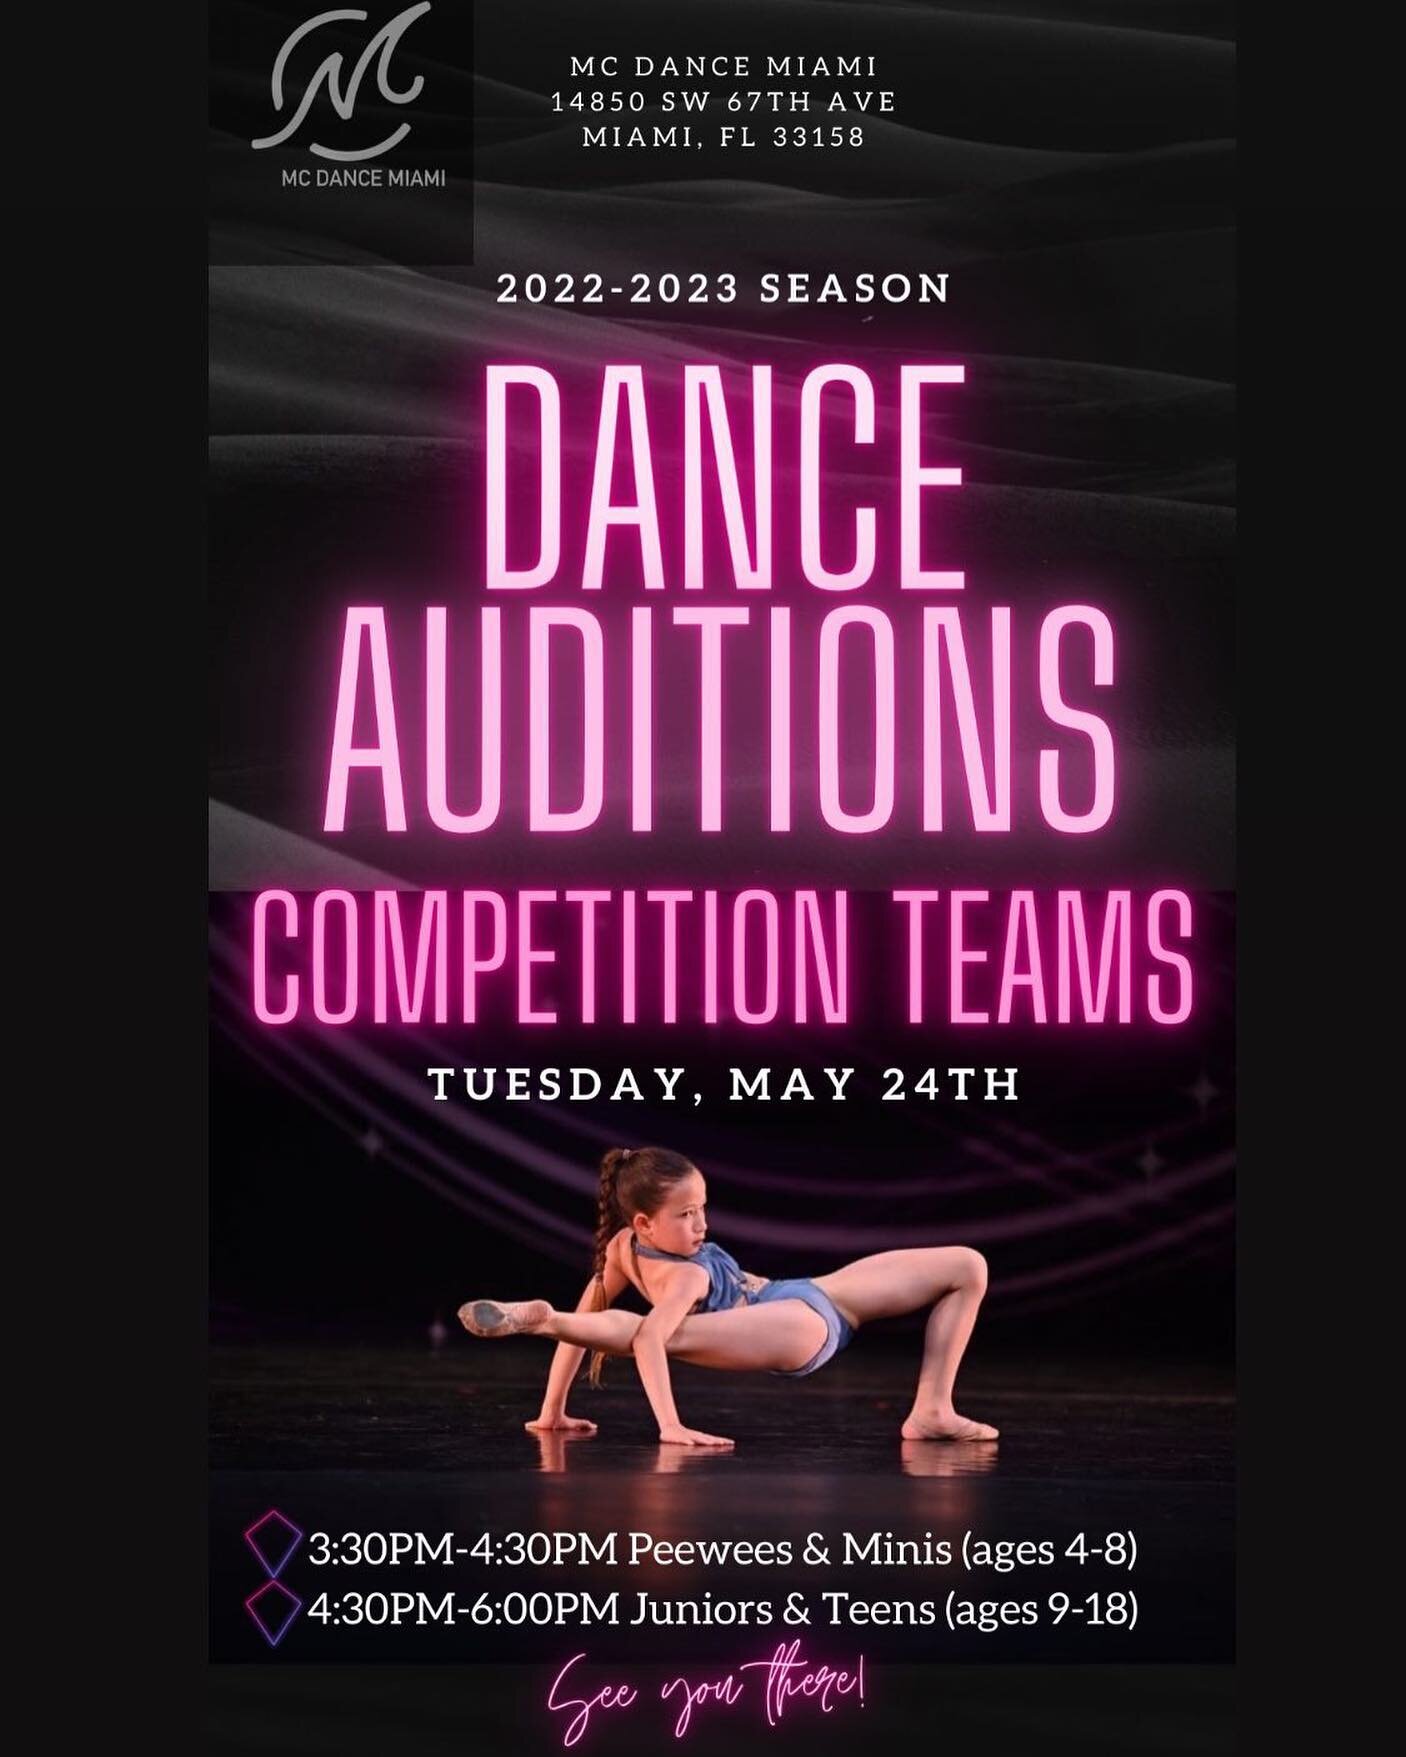 *DANCE AUDITIONS* @mcdancemiami 
Tuesday, May 24th
3:30-4:30PM (ages 4-8)
4:30-6:00PM (ages 9-18)
@mcdancemiami 
Competition Teams &amp; Company Level
2022-2023 Season
See you there!

Contact us to register mcdancemiami@gmail.com
No audition fee. Aud